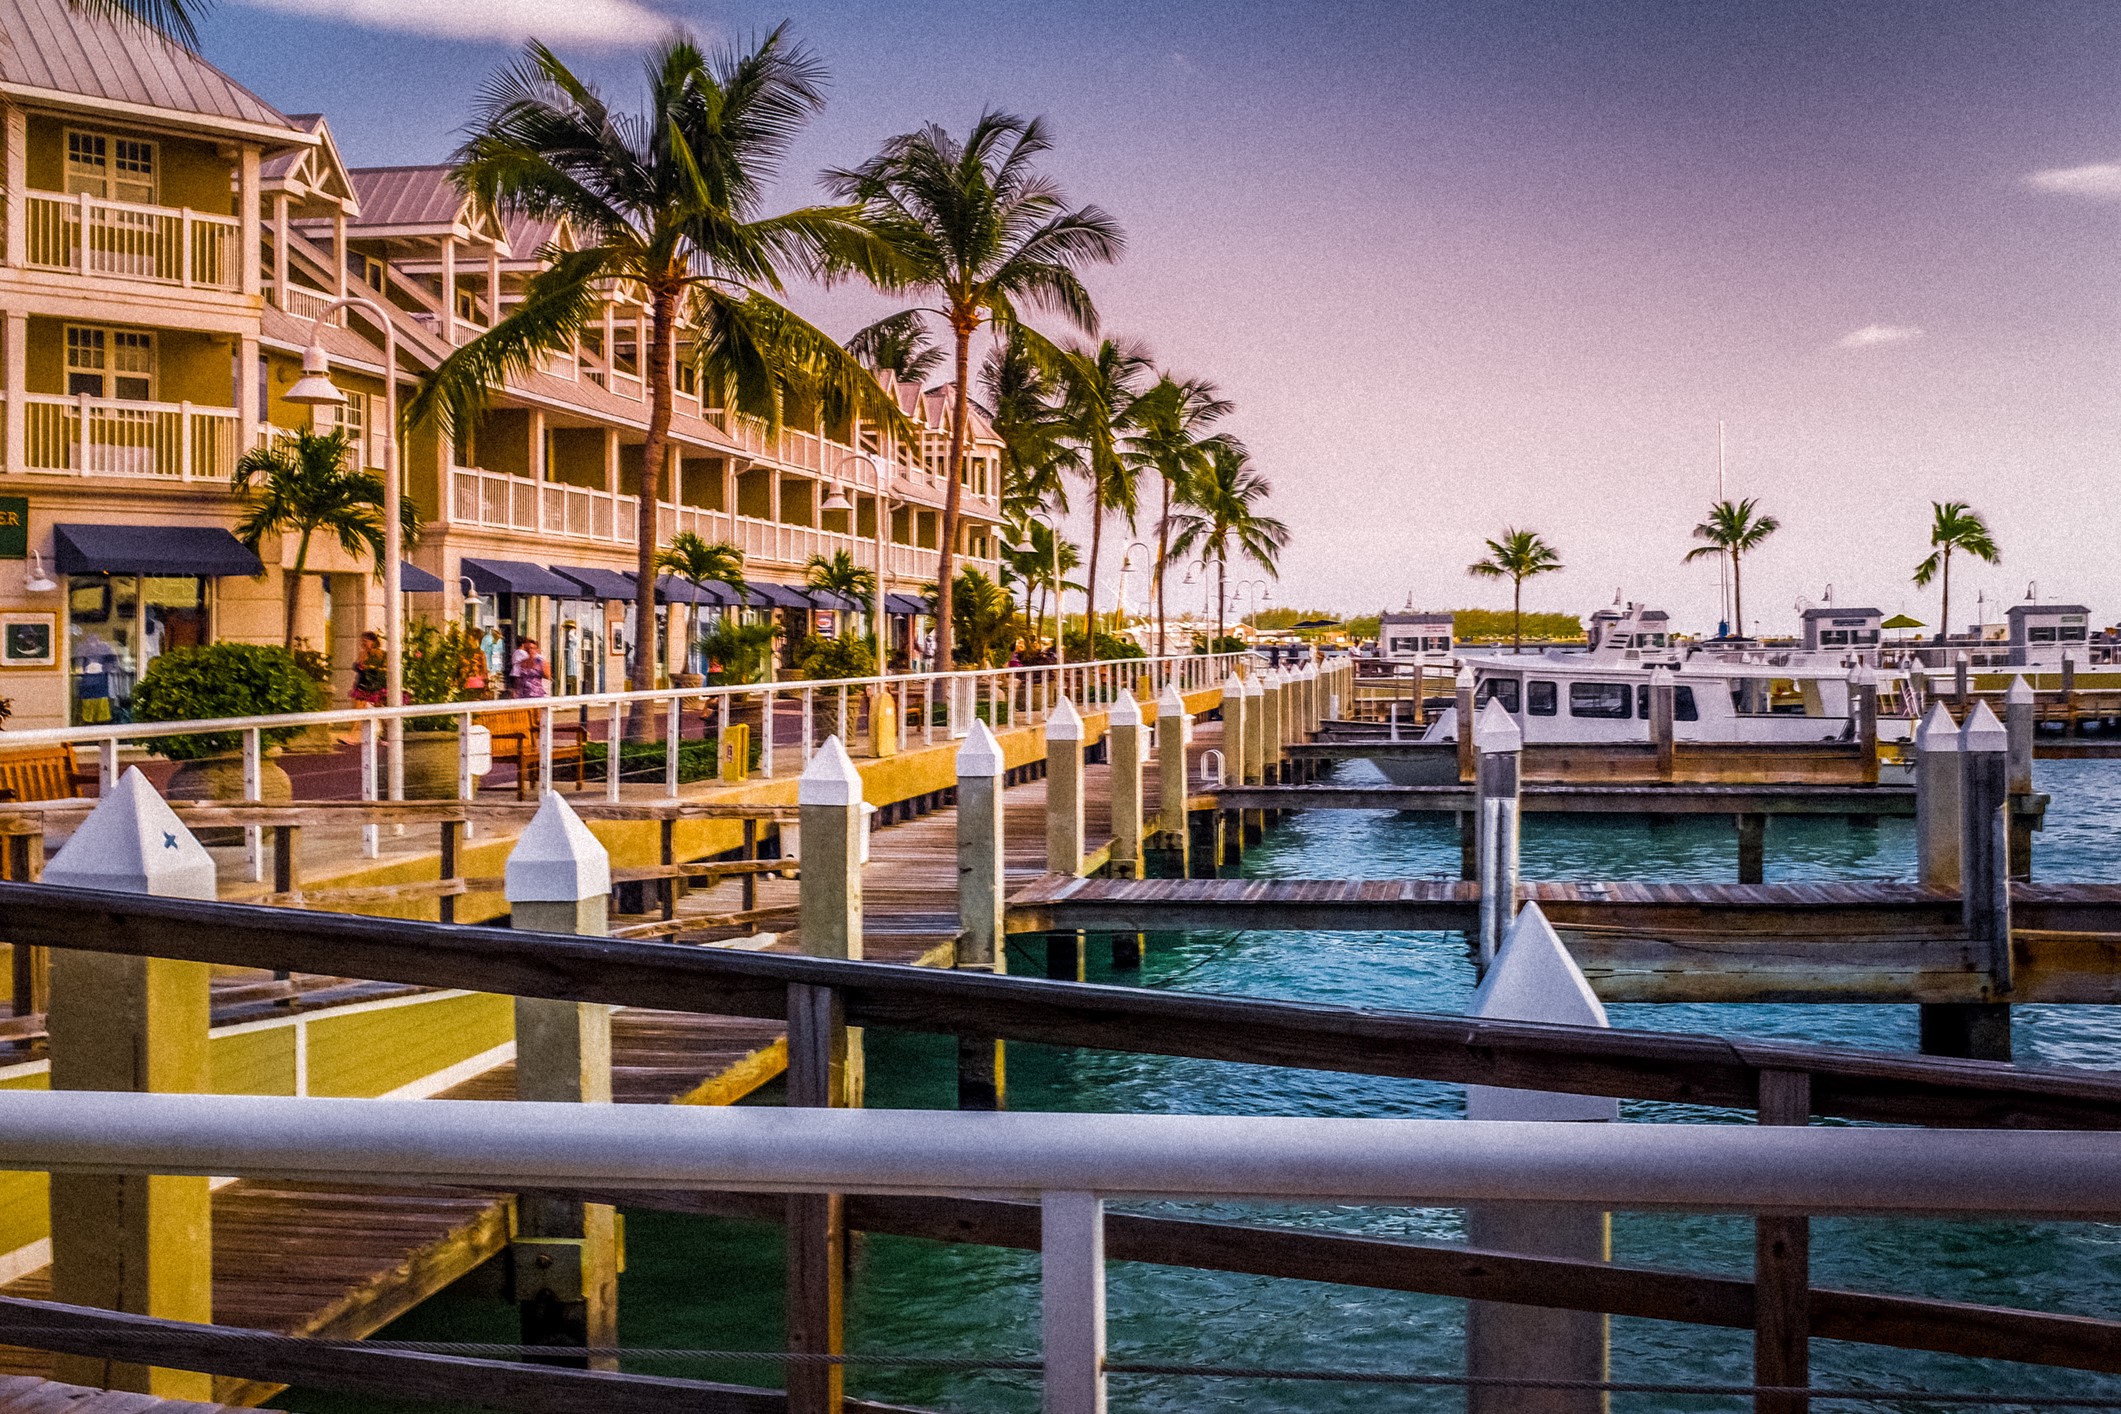 7 reasons why you should visit Key West, Florida, Rough Guides